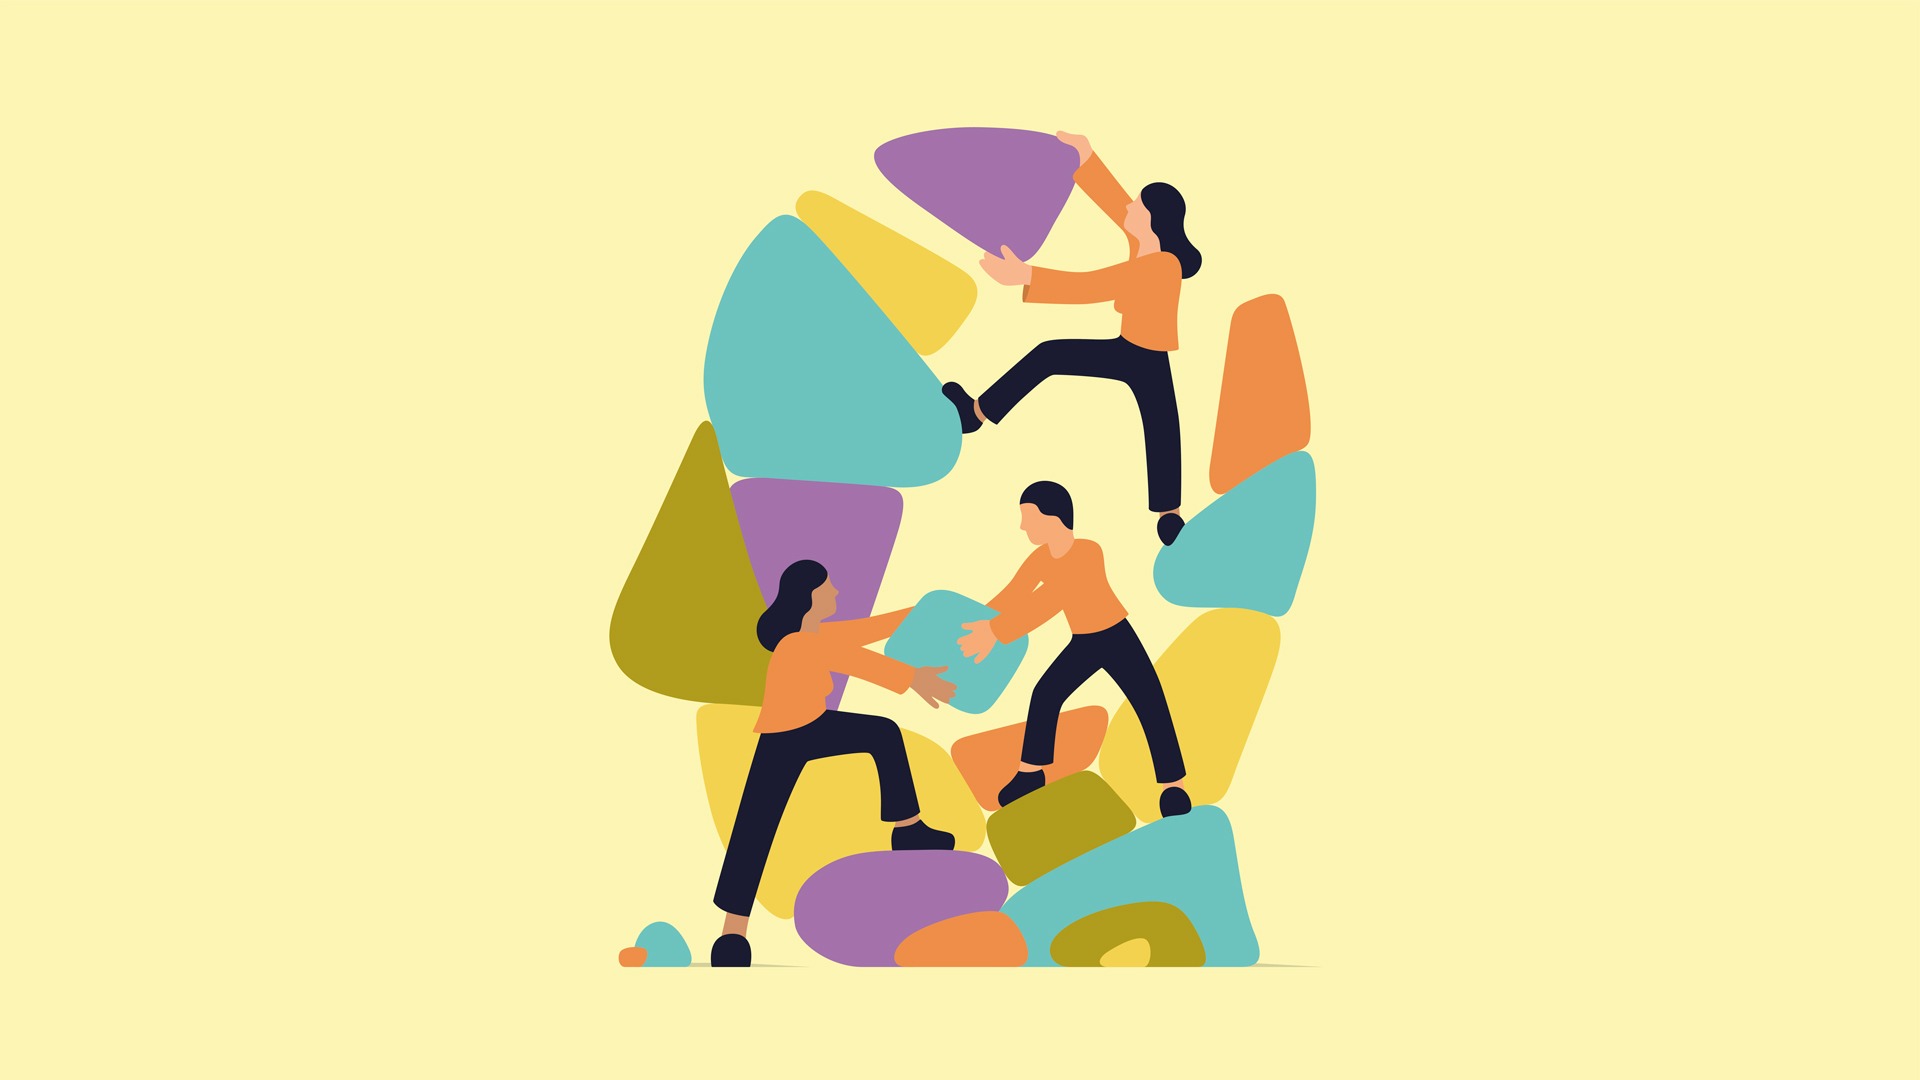 Illustration of three people collaboratively assembling a structure of colourful, abstract shapes.